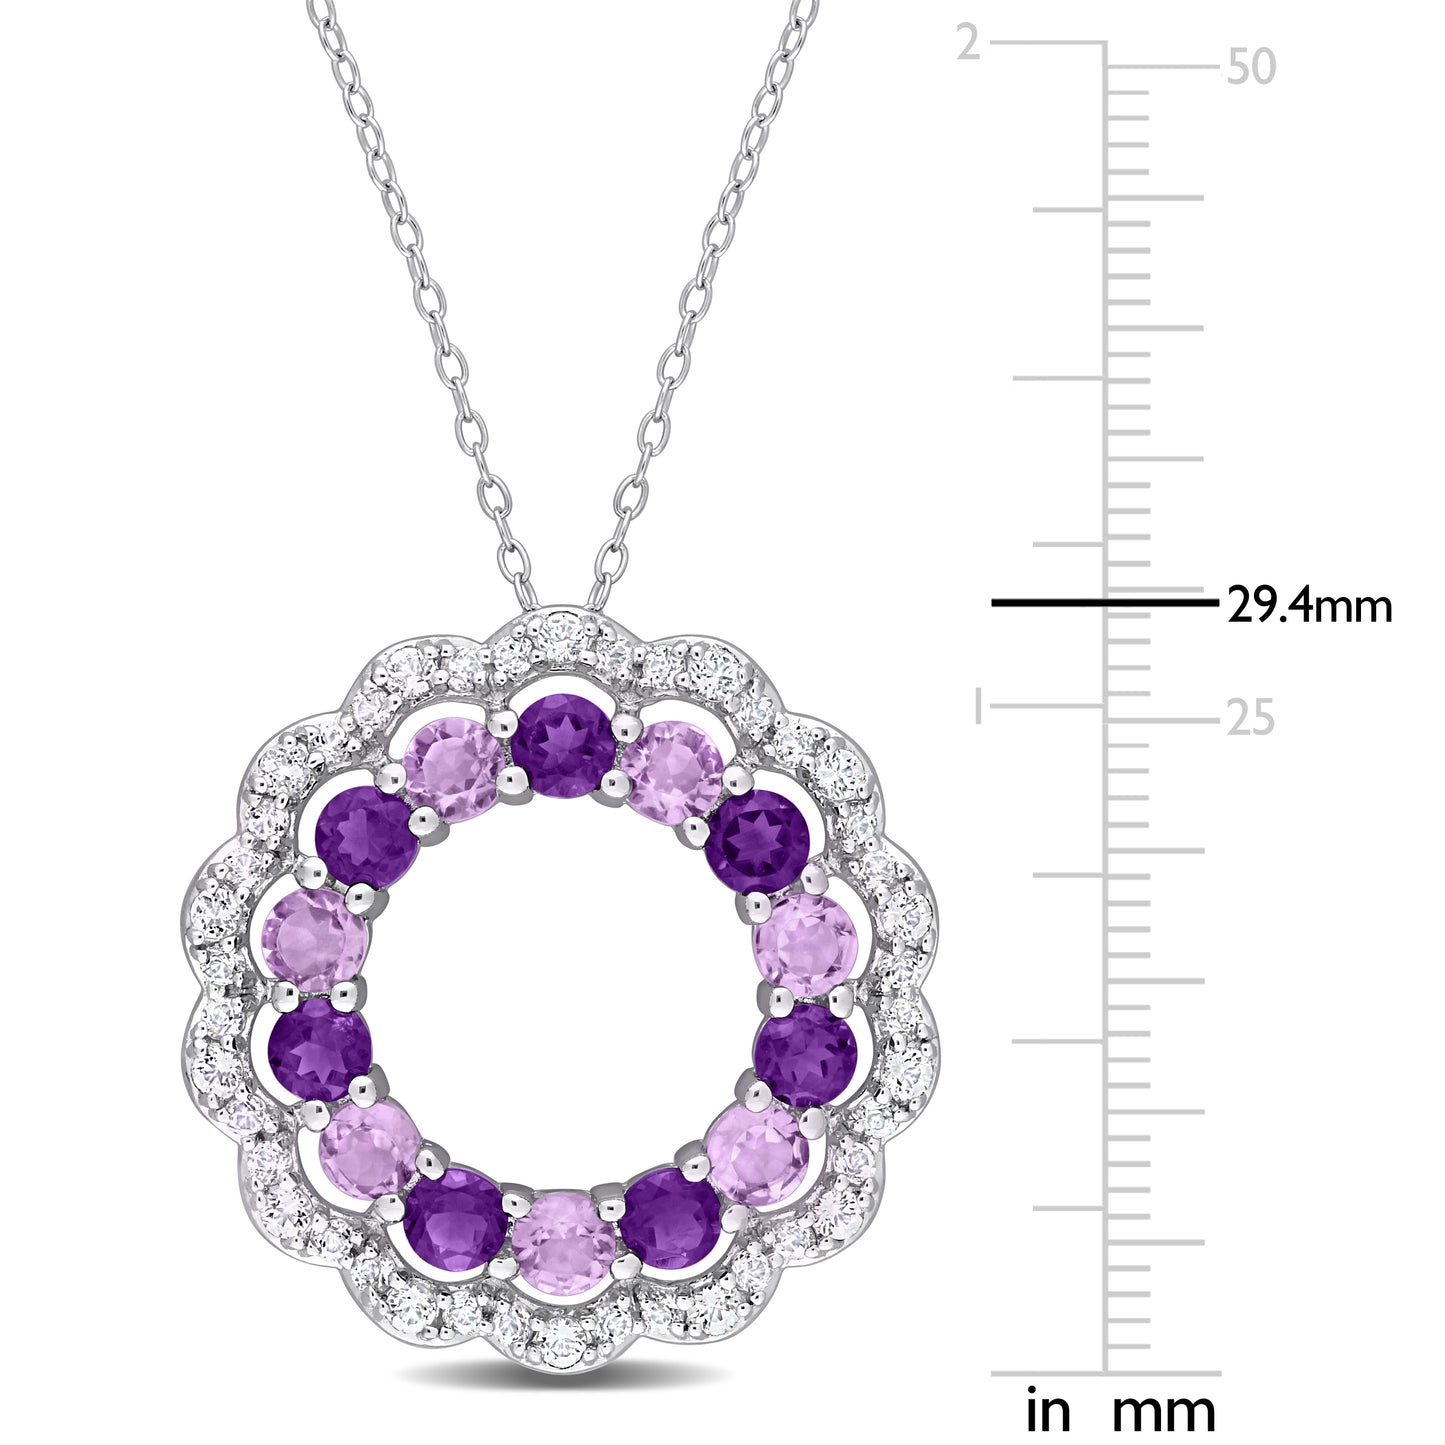 5 3/8ct Amethyst & White Topaz Open Halo Necklace in Sterling Silver